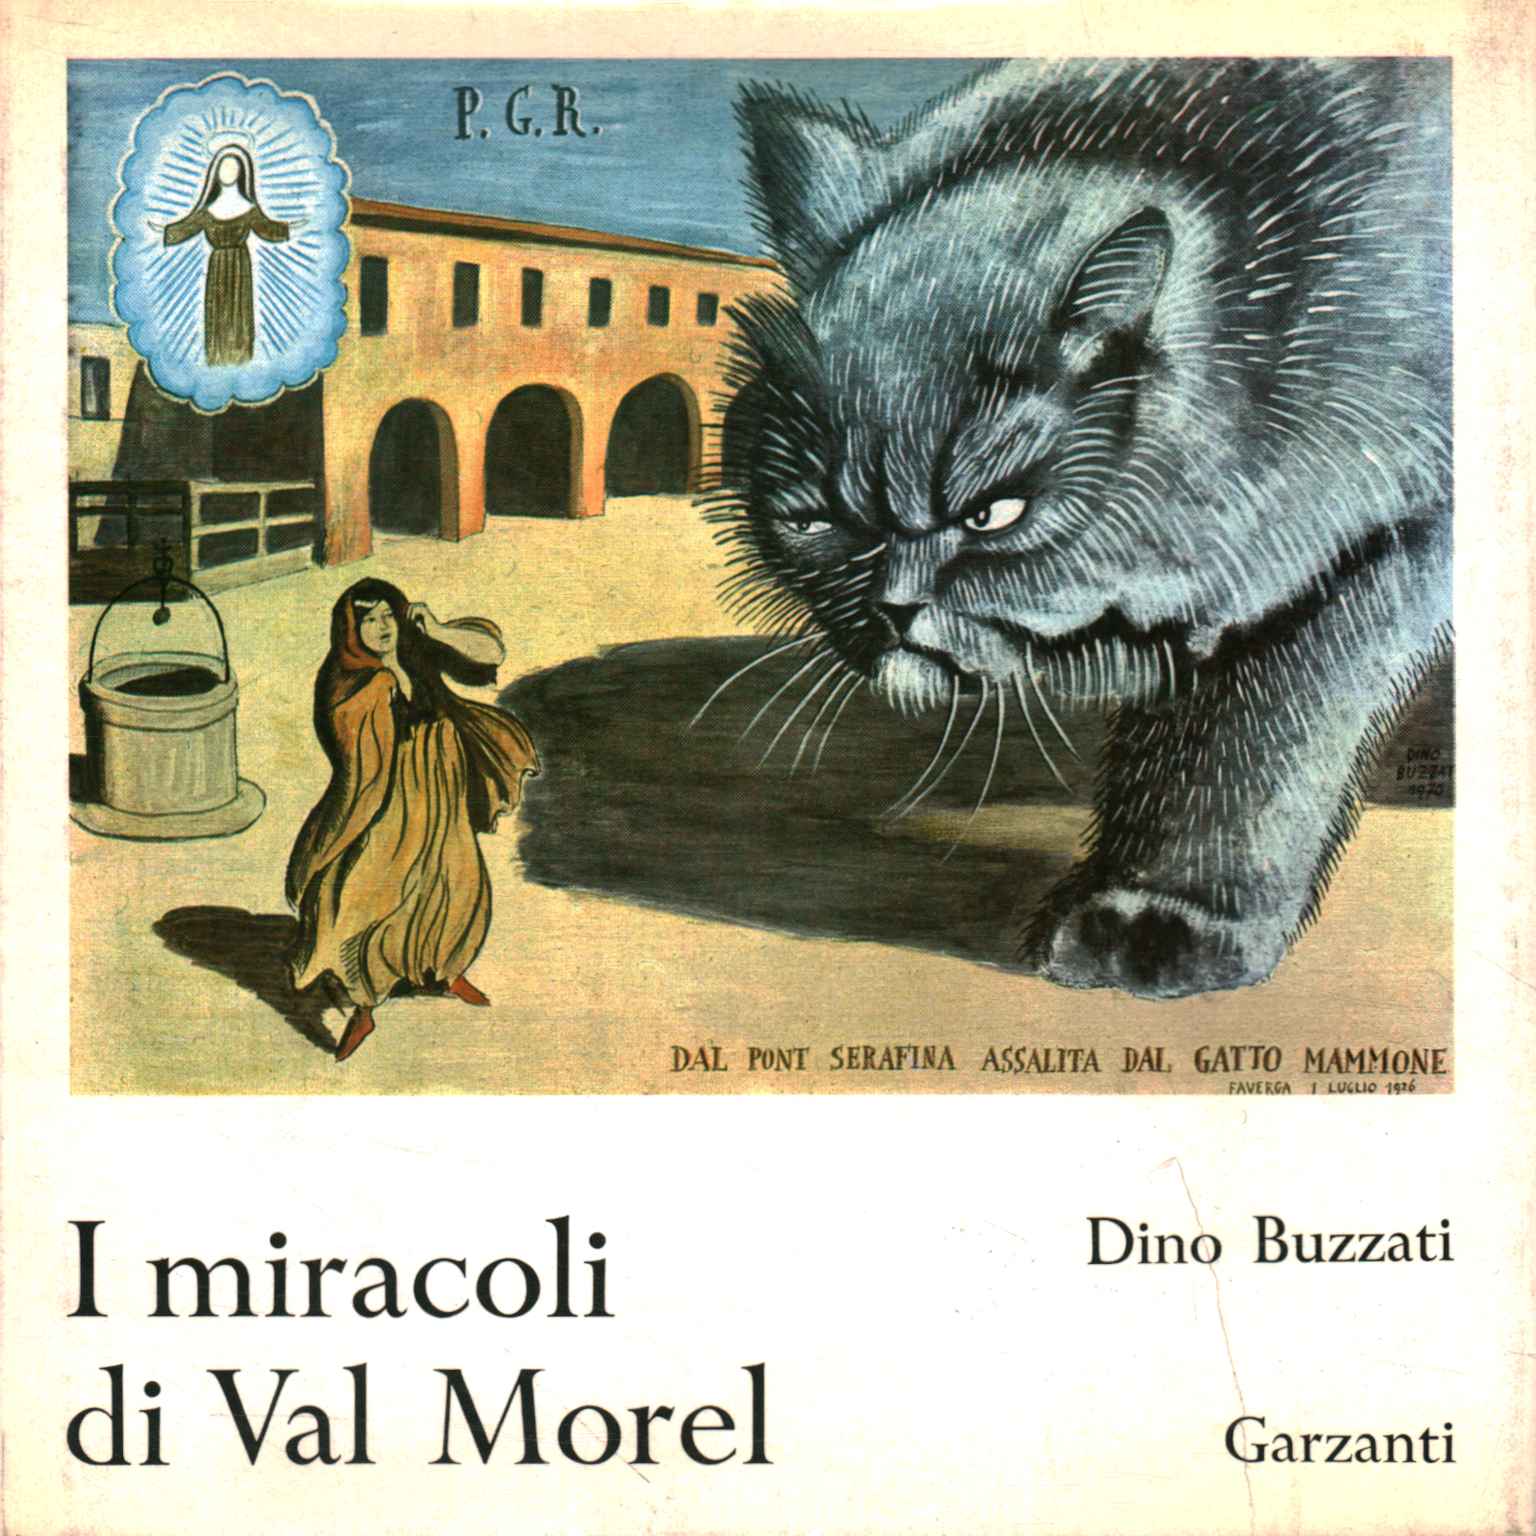 The miracles of Val Morel